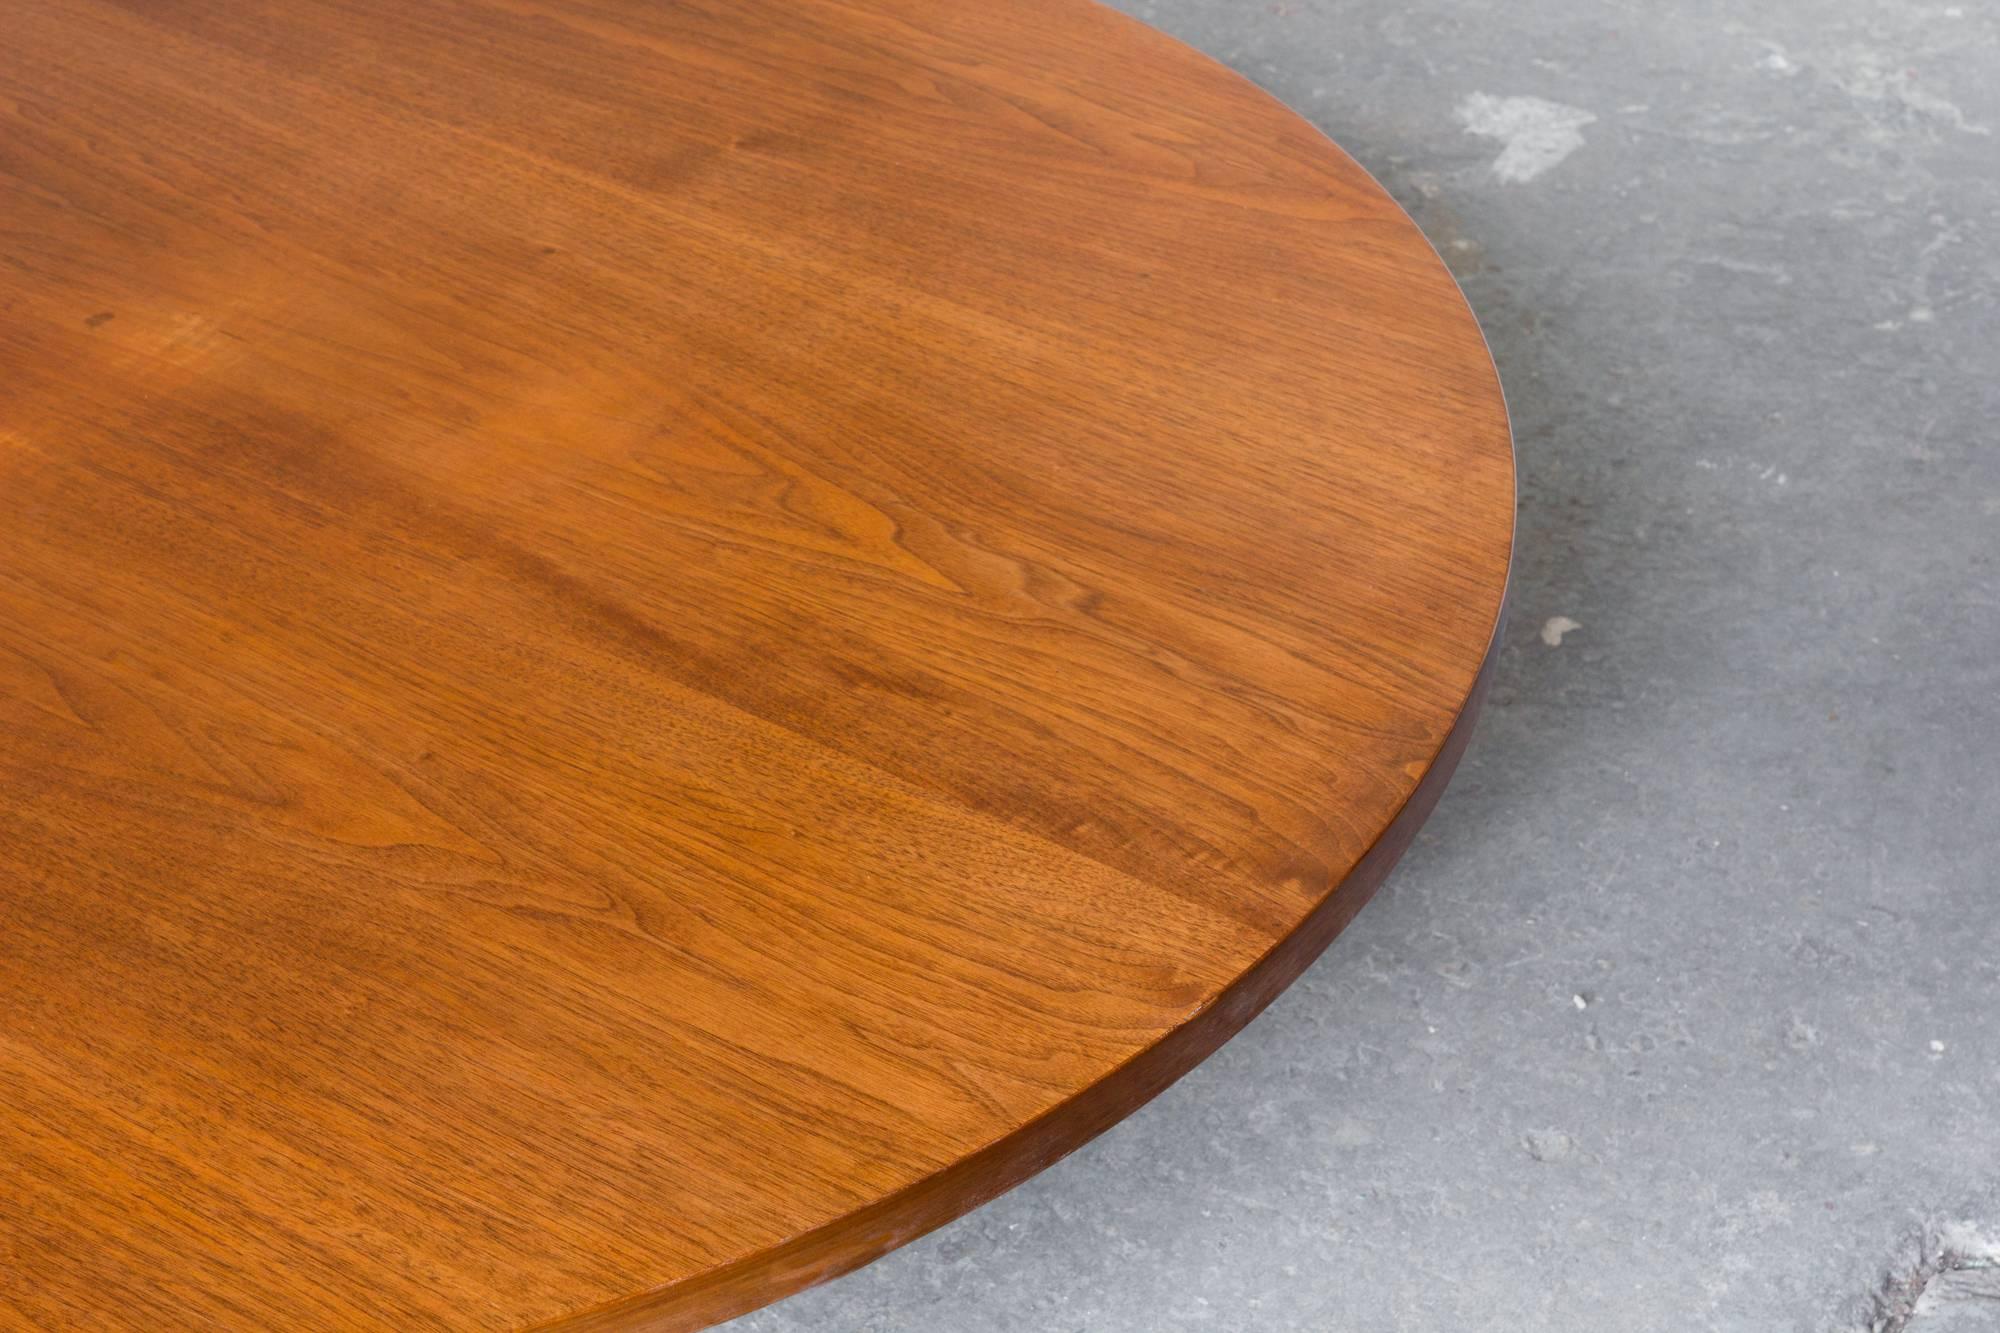 Low and well-proportioned circular coffee table in walnut and trimmed in aluminum by Paul McCobb for his 